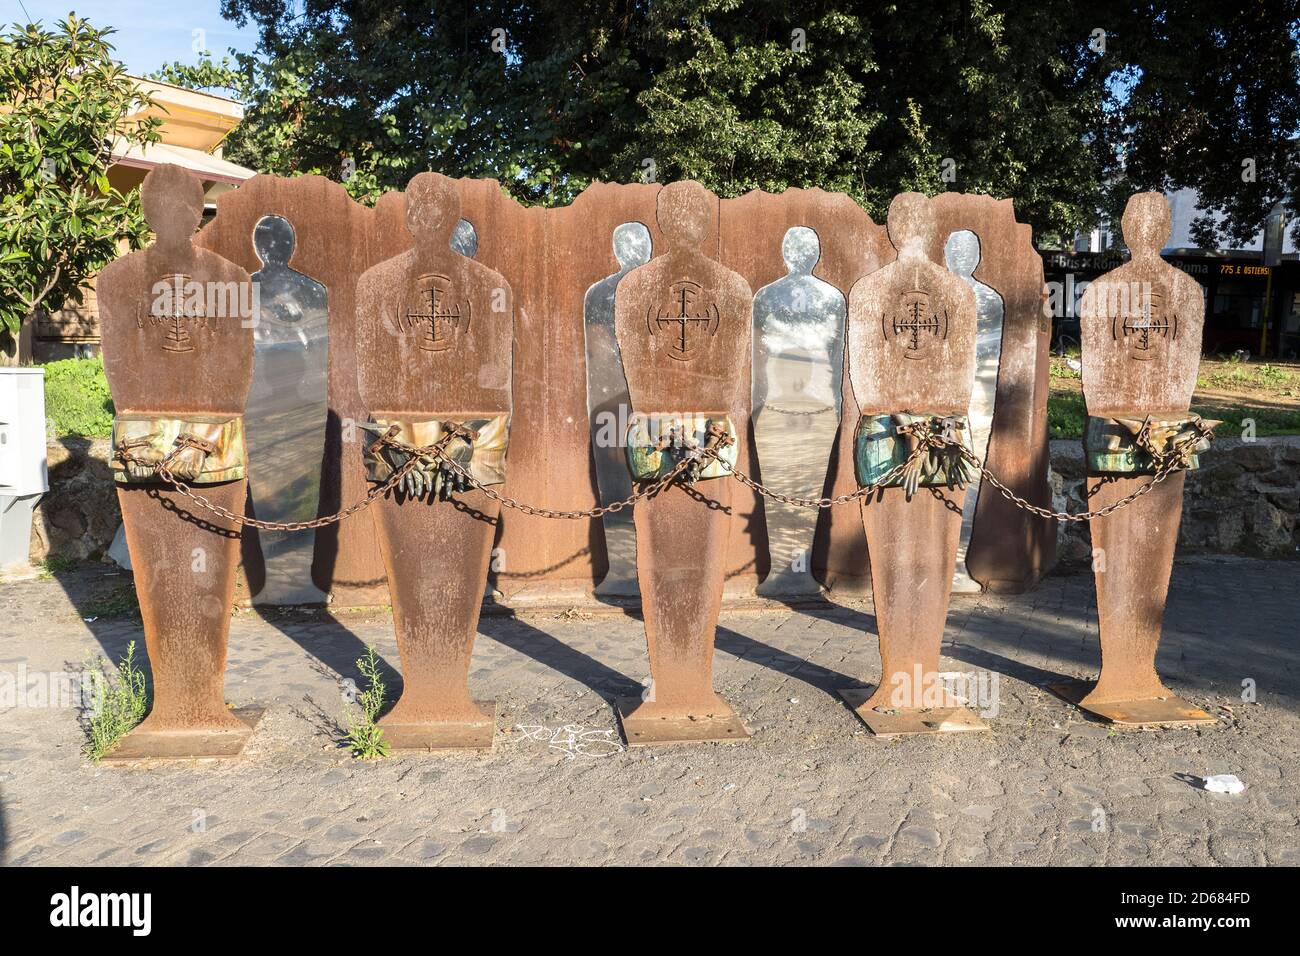 Anti-fascist monument "Tutti potenziali bersagli" (all potential targets) dedicated to the victims of Nazism and racism in piazzale Ostiense - Rome, Italy Stock Photo